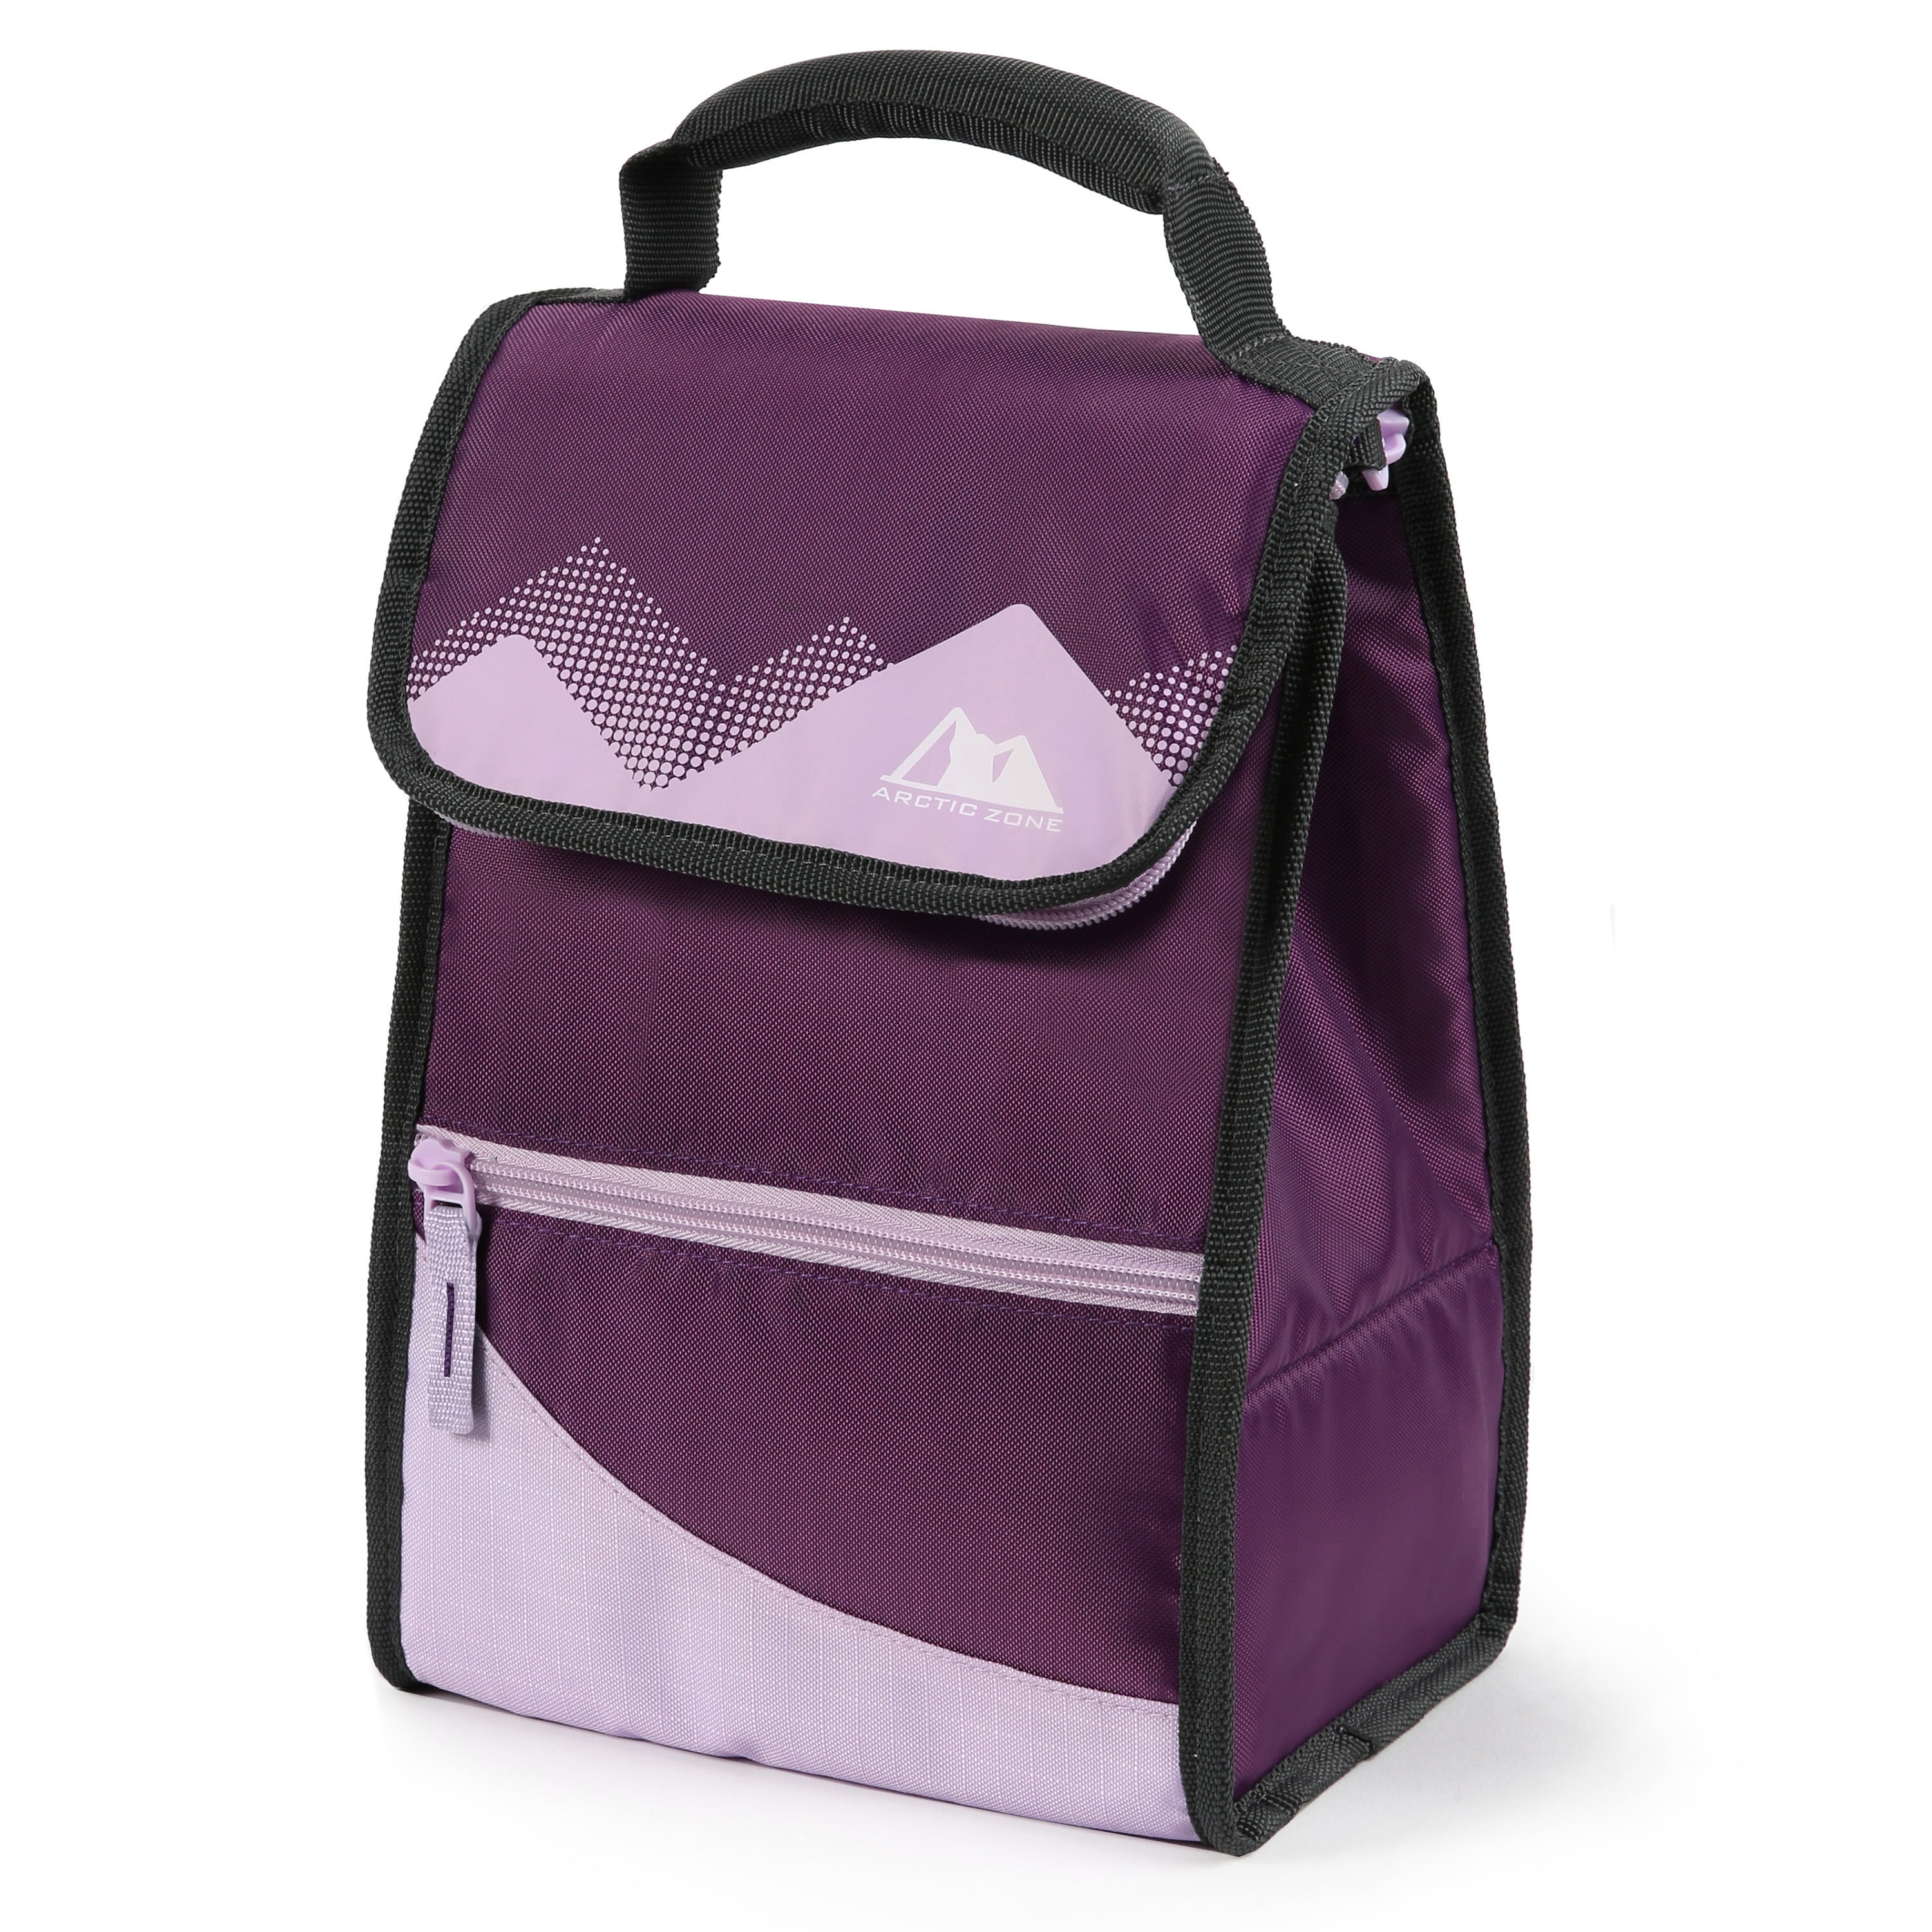 Insulated Upright Lunch Bag Lunchbox Lunch Box  Galaxy with Neon Trim